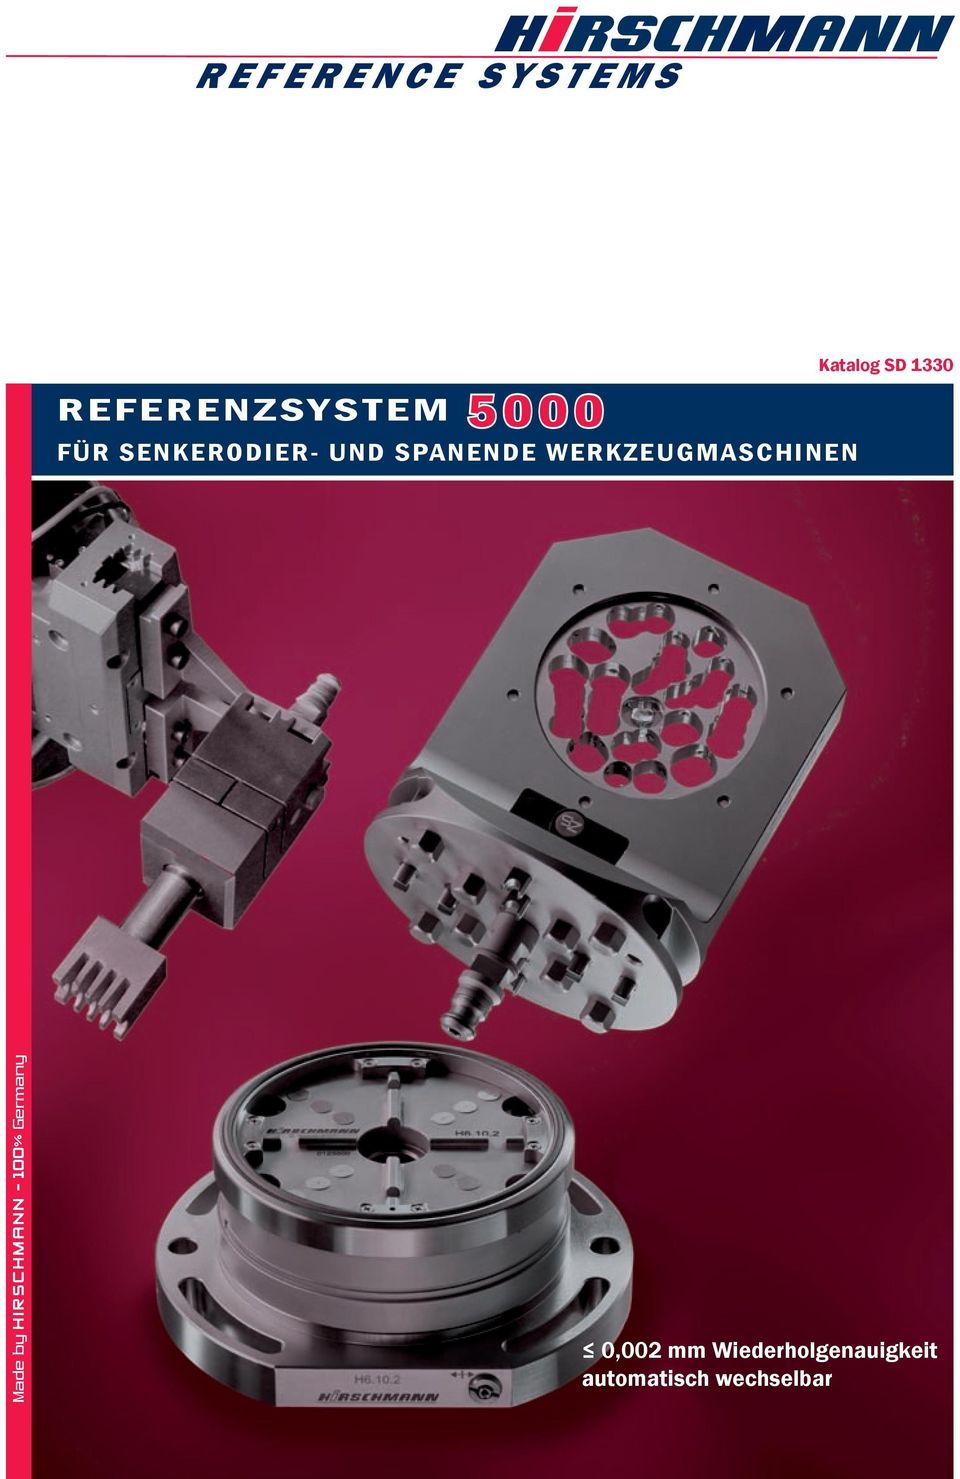 Katalog SD 1330 Made by by HIRSCHMANN - 100% Germany